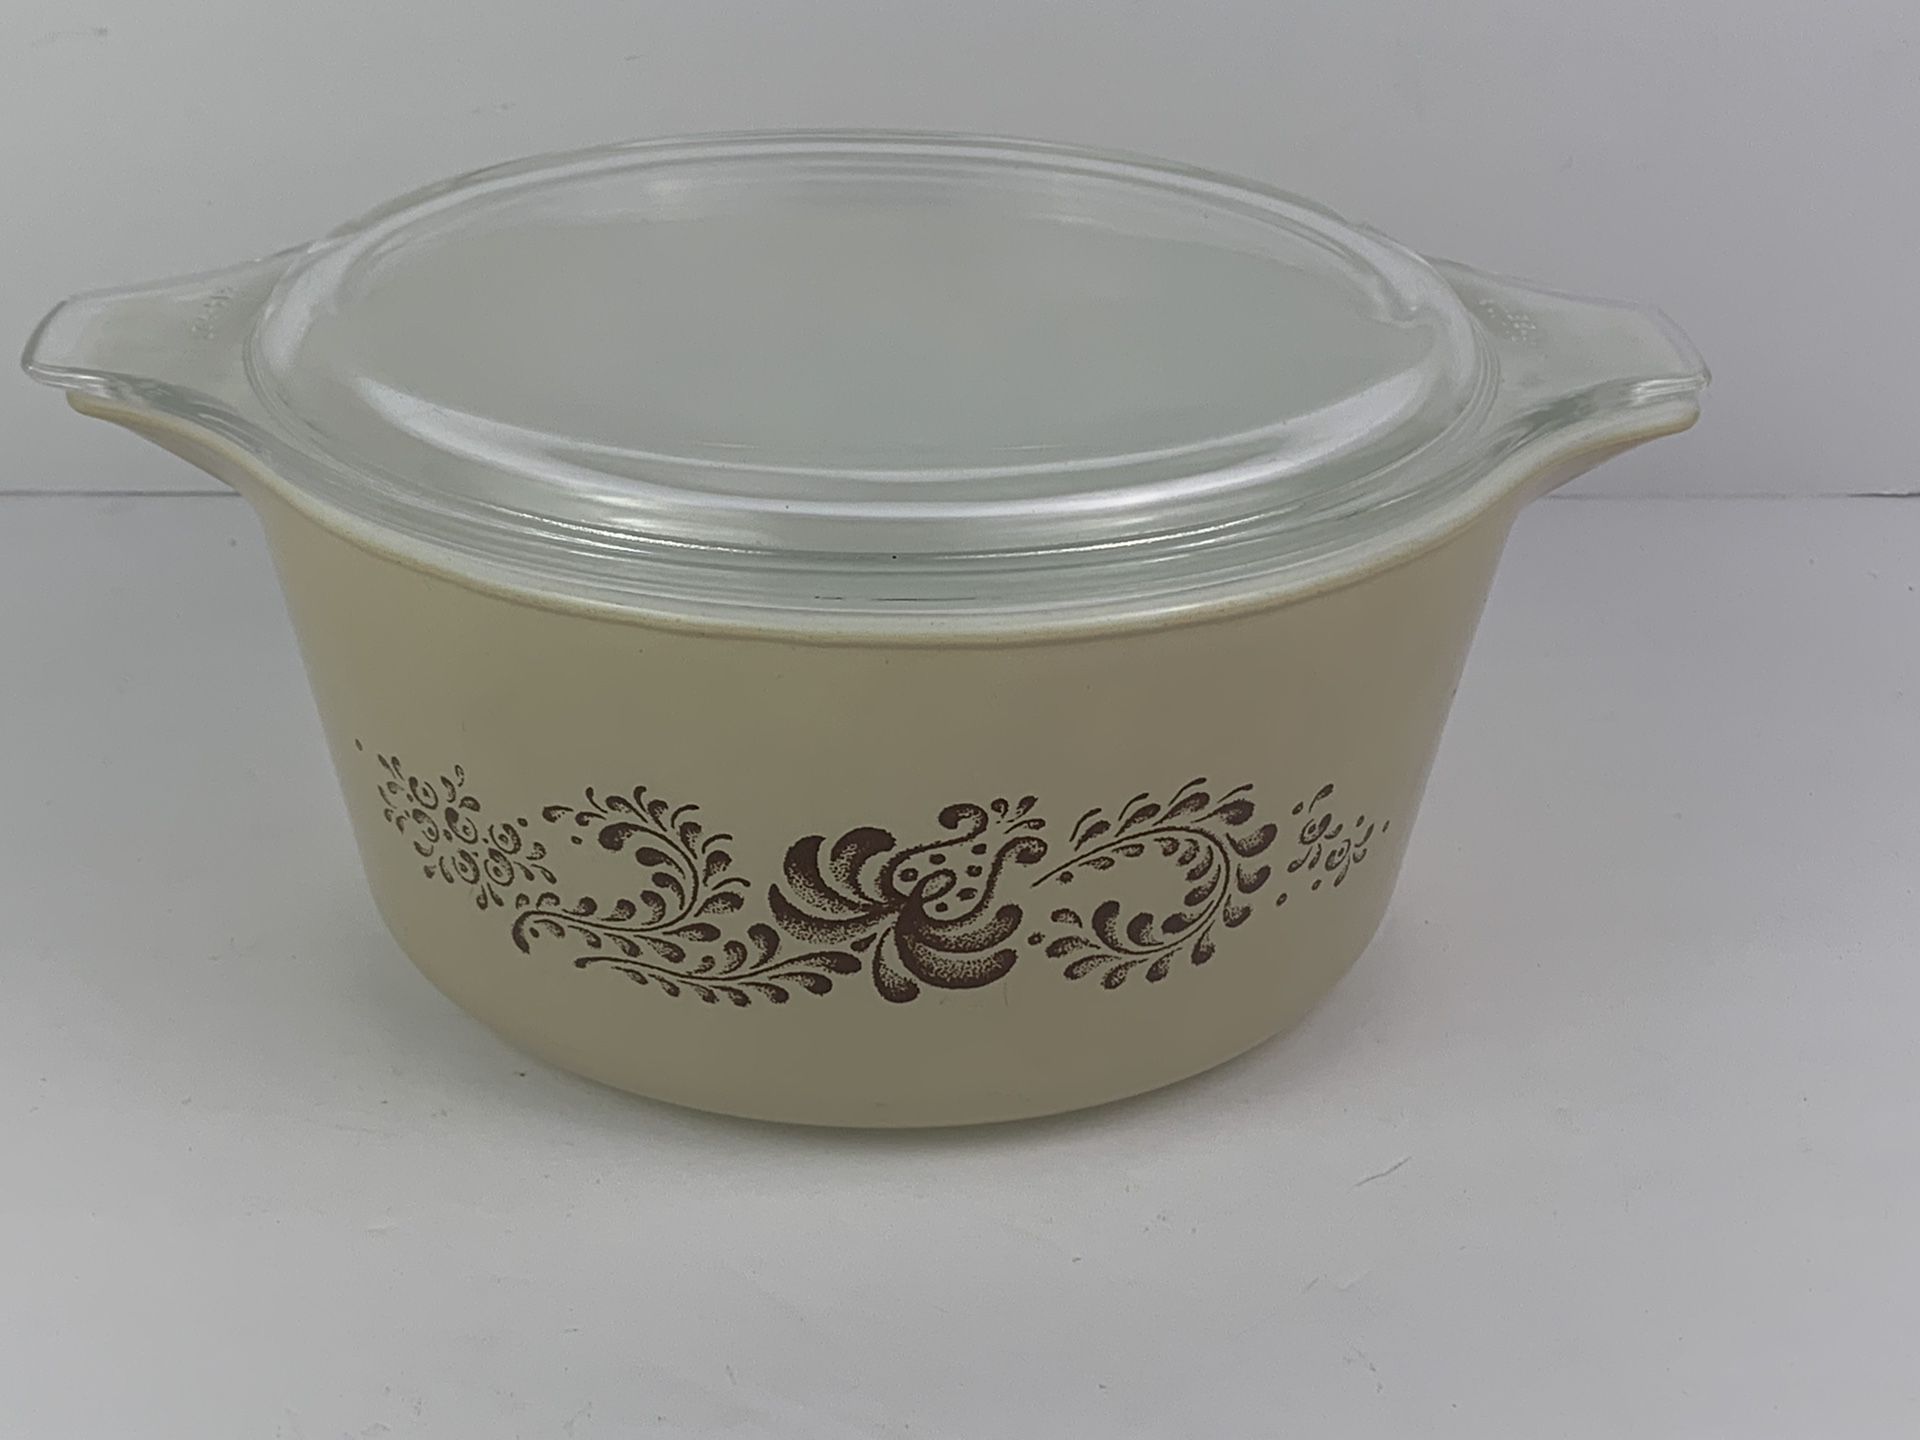 Pyrex Homestead Brown Tan Covered Casserole Dish 1 1/2 qt VINTAGE 474B With Lid